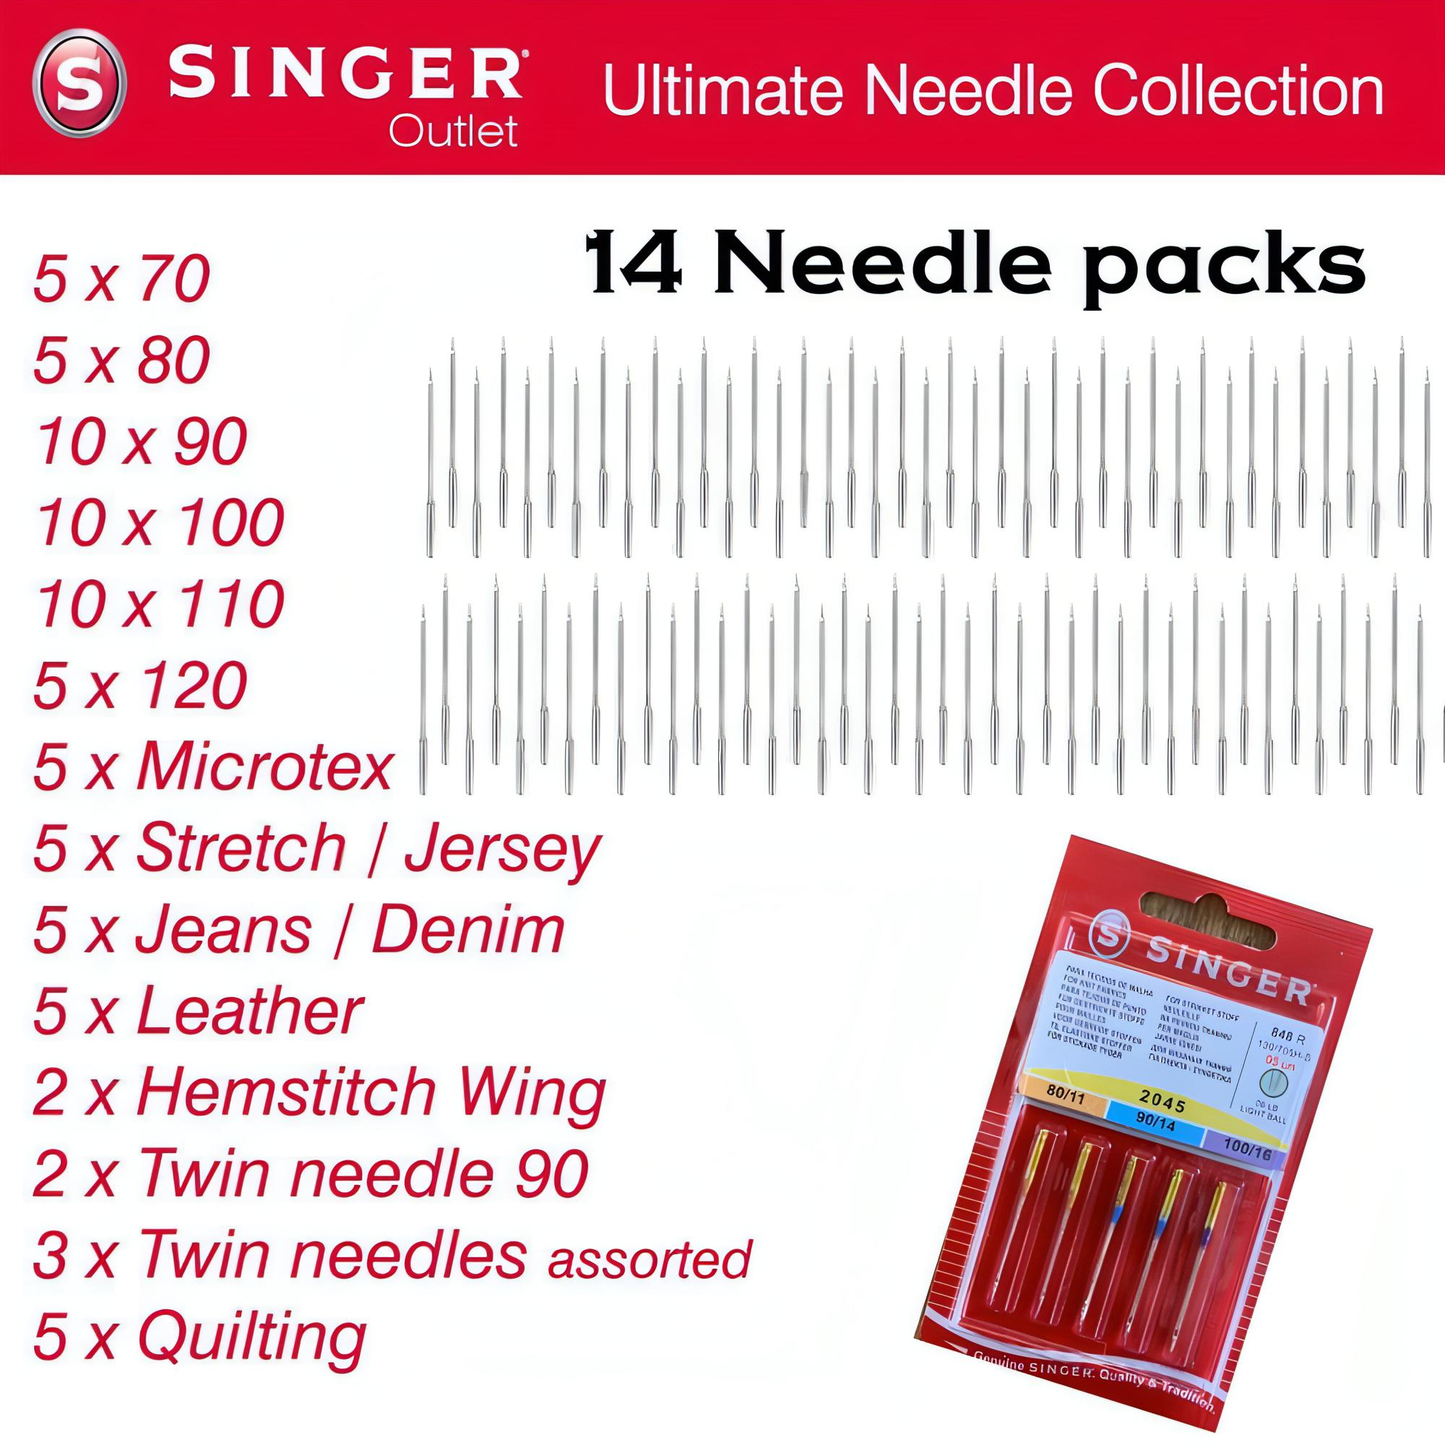 Ultimate Needle Collection by Singer Outlet -14 packs of Sewing Machine Needles (77 needles) - save over 50%